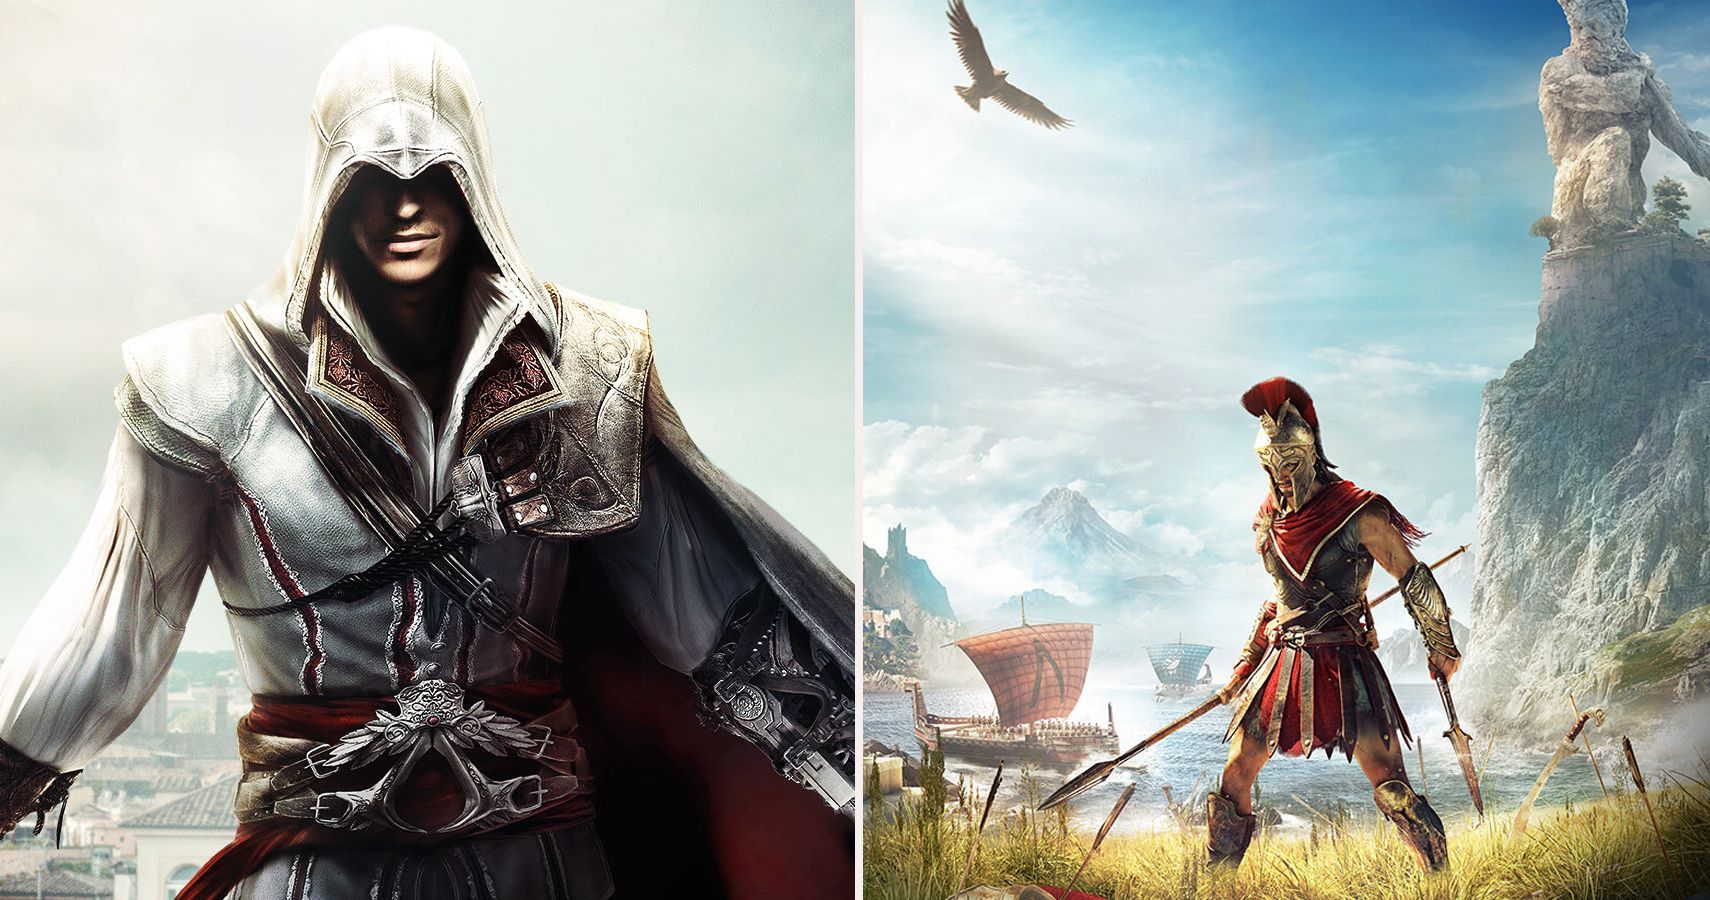 Assassins creed red дата выхода. Ассасин Крид 2020. Assassin’s Creed Mirage. Ассасин Крид Mirage. Ассасин Крид Мираж.